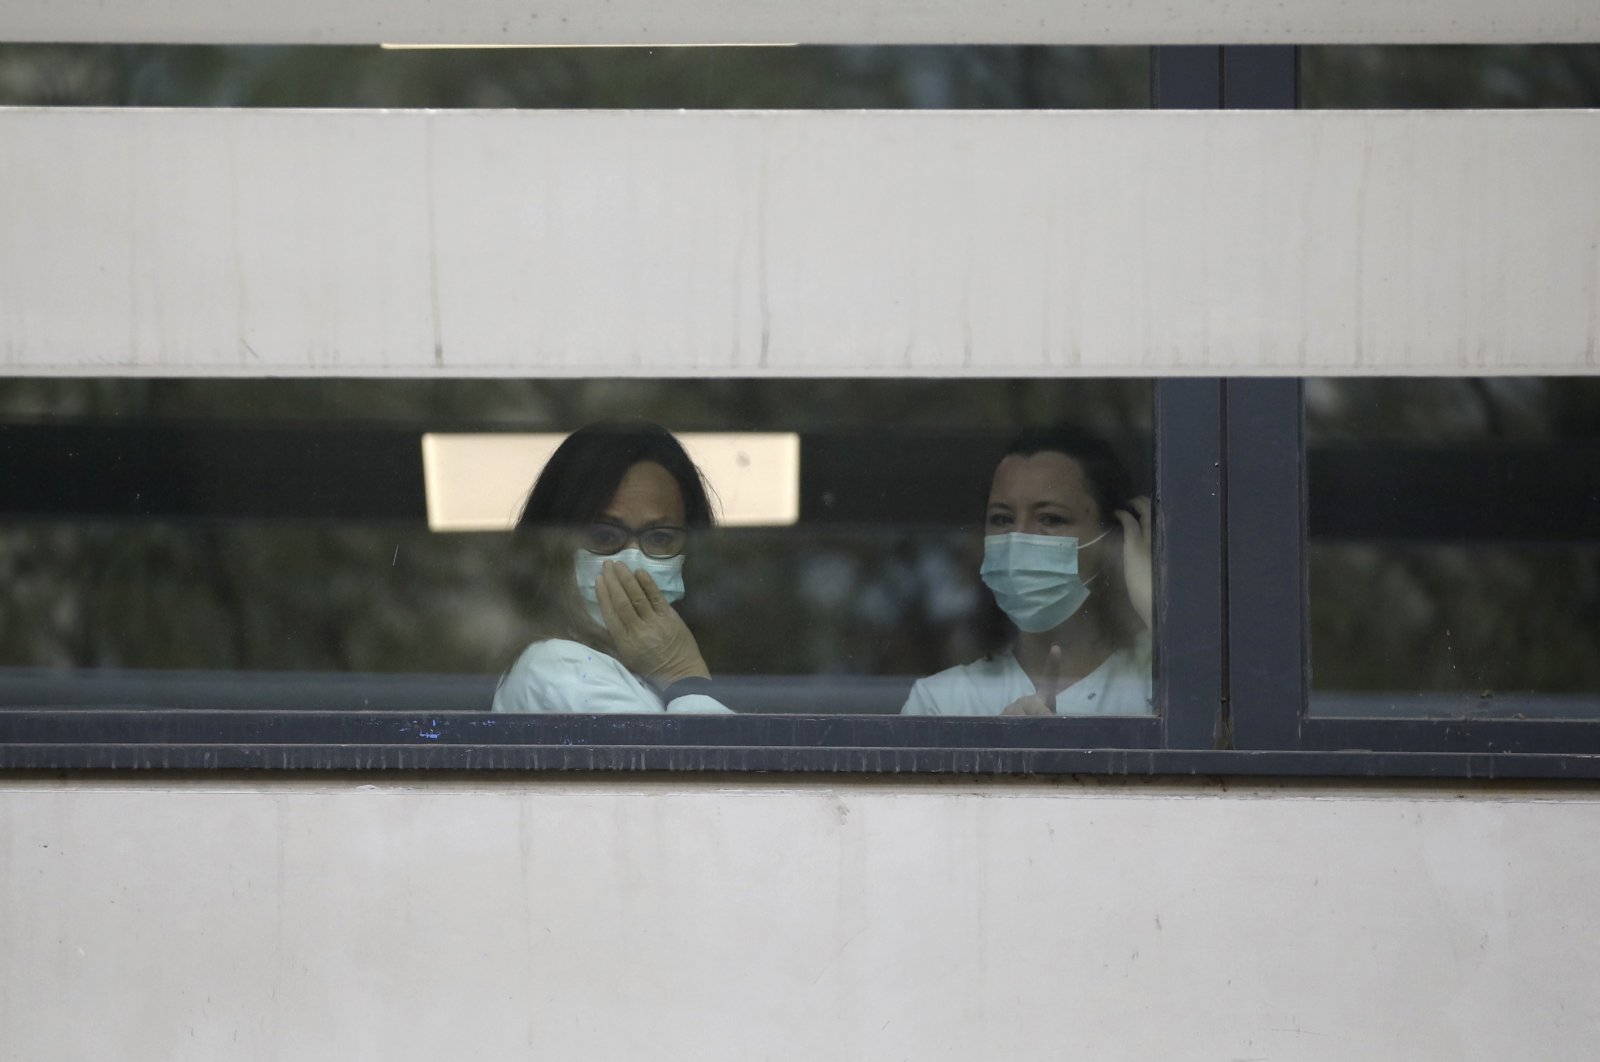 Medical staff watch people waiting in line to get a coronavirus test outside the La Timone hospital, Marseille, Monday, March 23, 2020. (AP Photo)